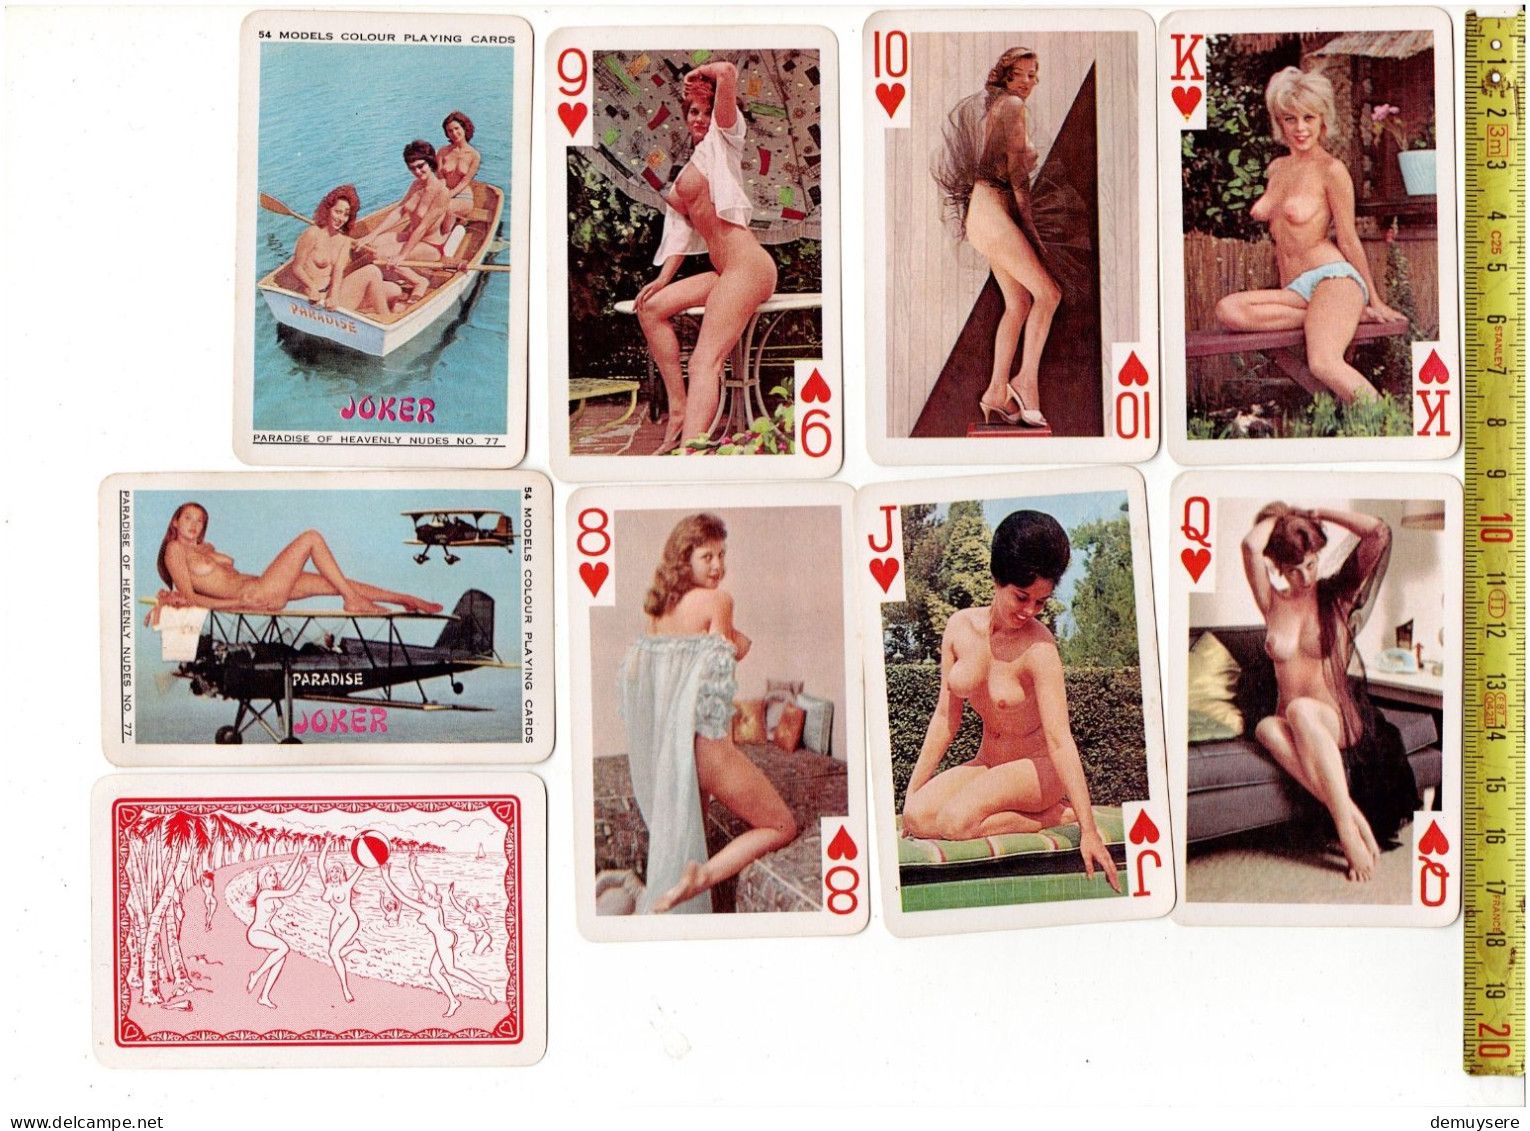 54 MODELS COLOUR PLAYING CARDS - PARADISE OF HEAVENLY NUDES NO 77 - Barajas De Naipe